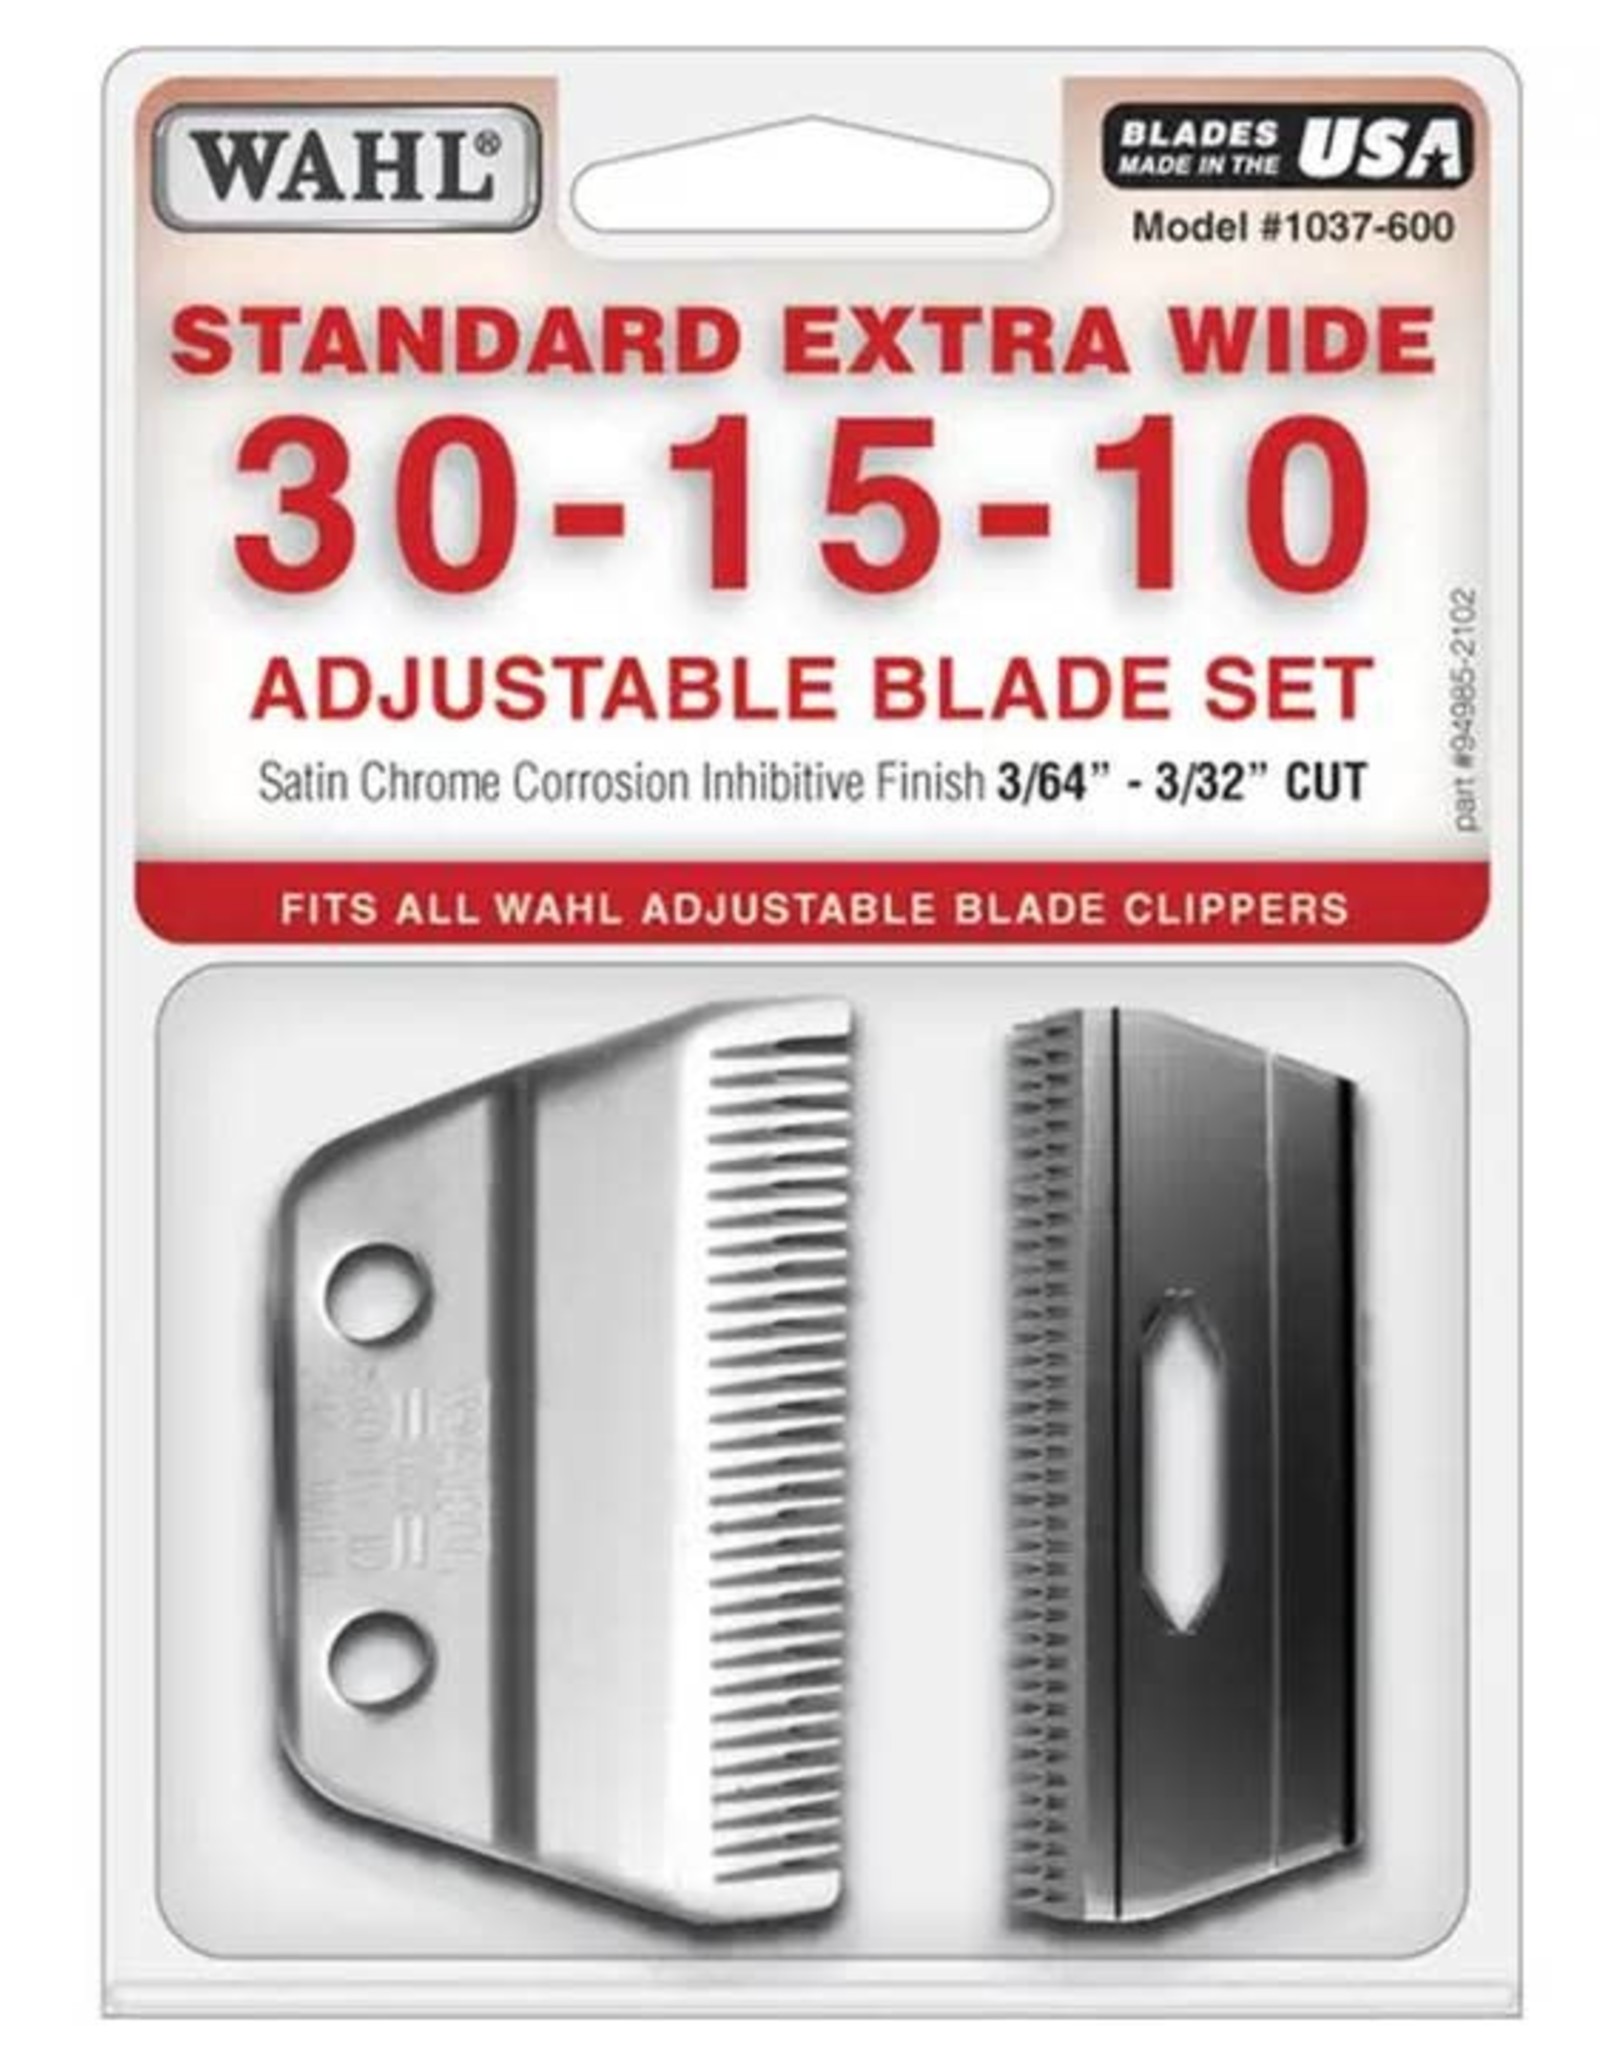 Wahl standard extra wide 30-15-10